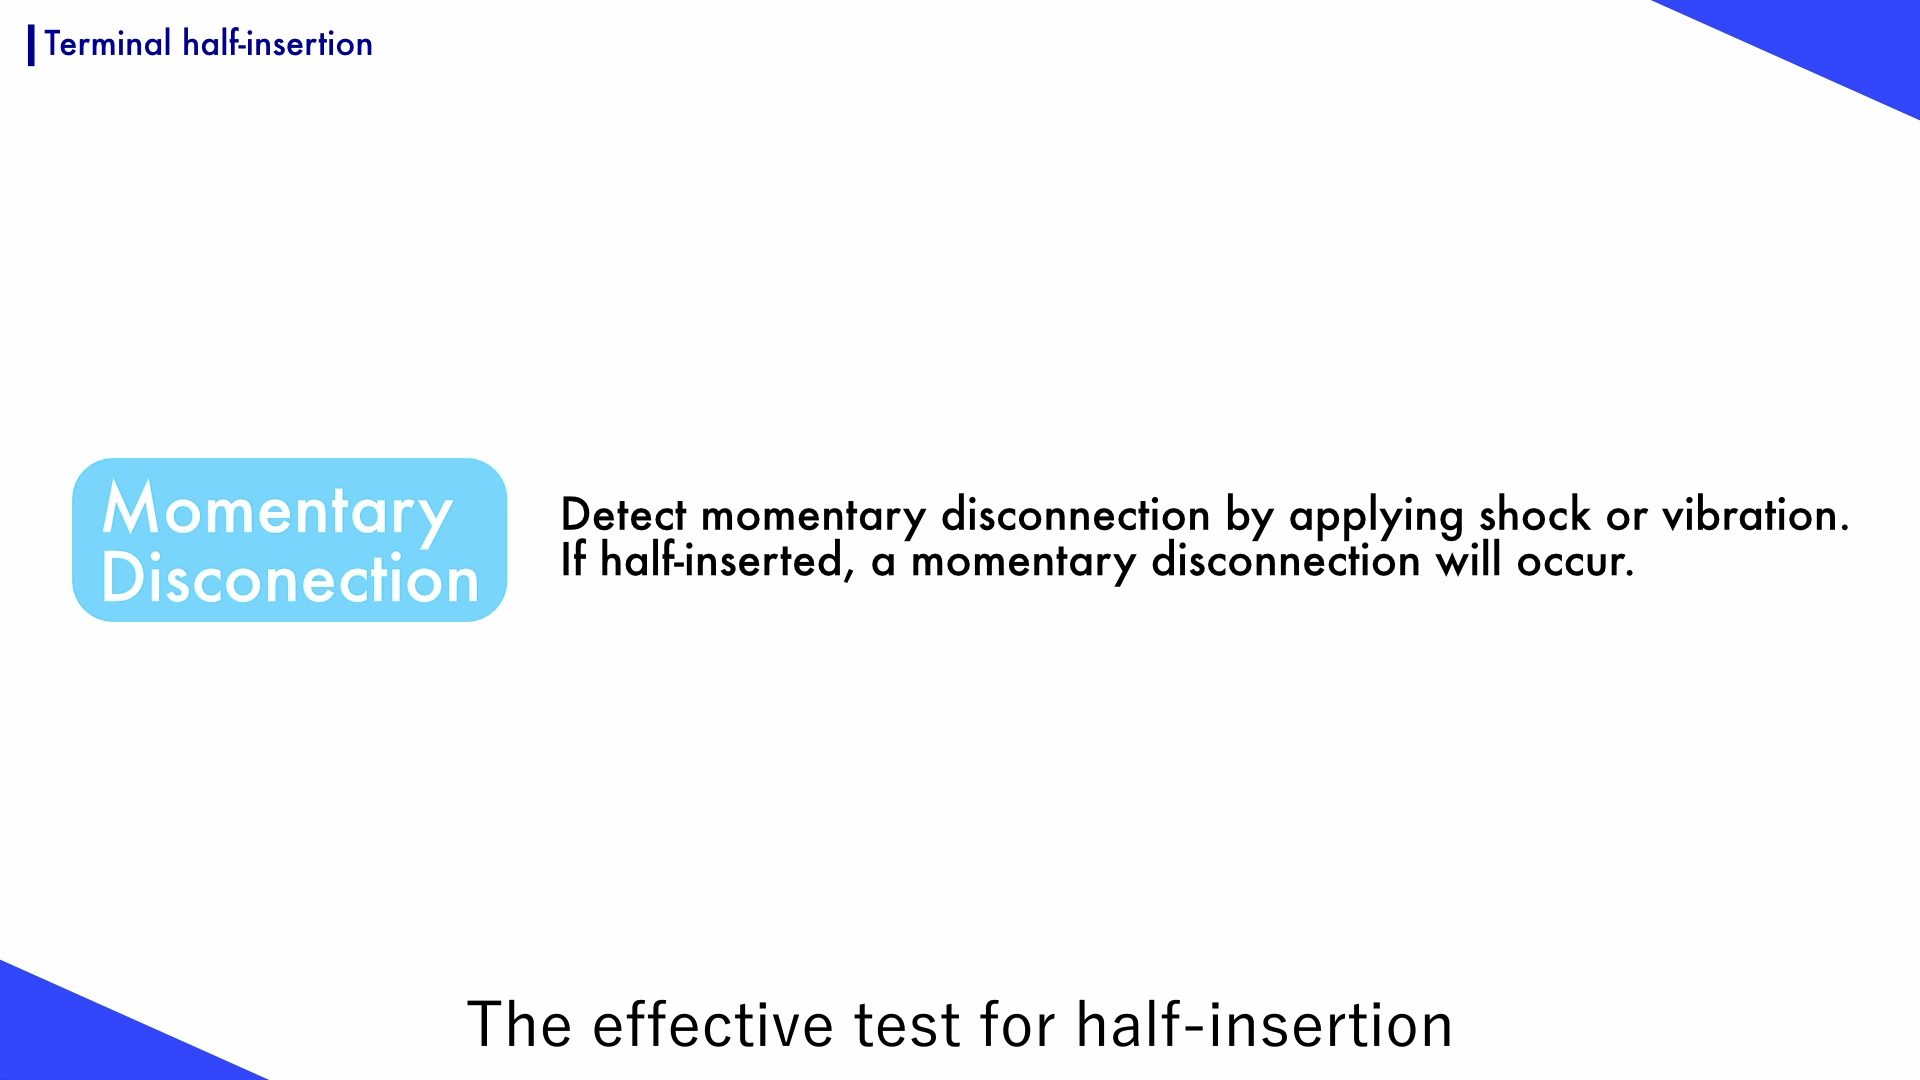 Momentary disconnection test is effective in preventing outflow of terminal disconnection due to half-insertion